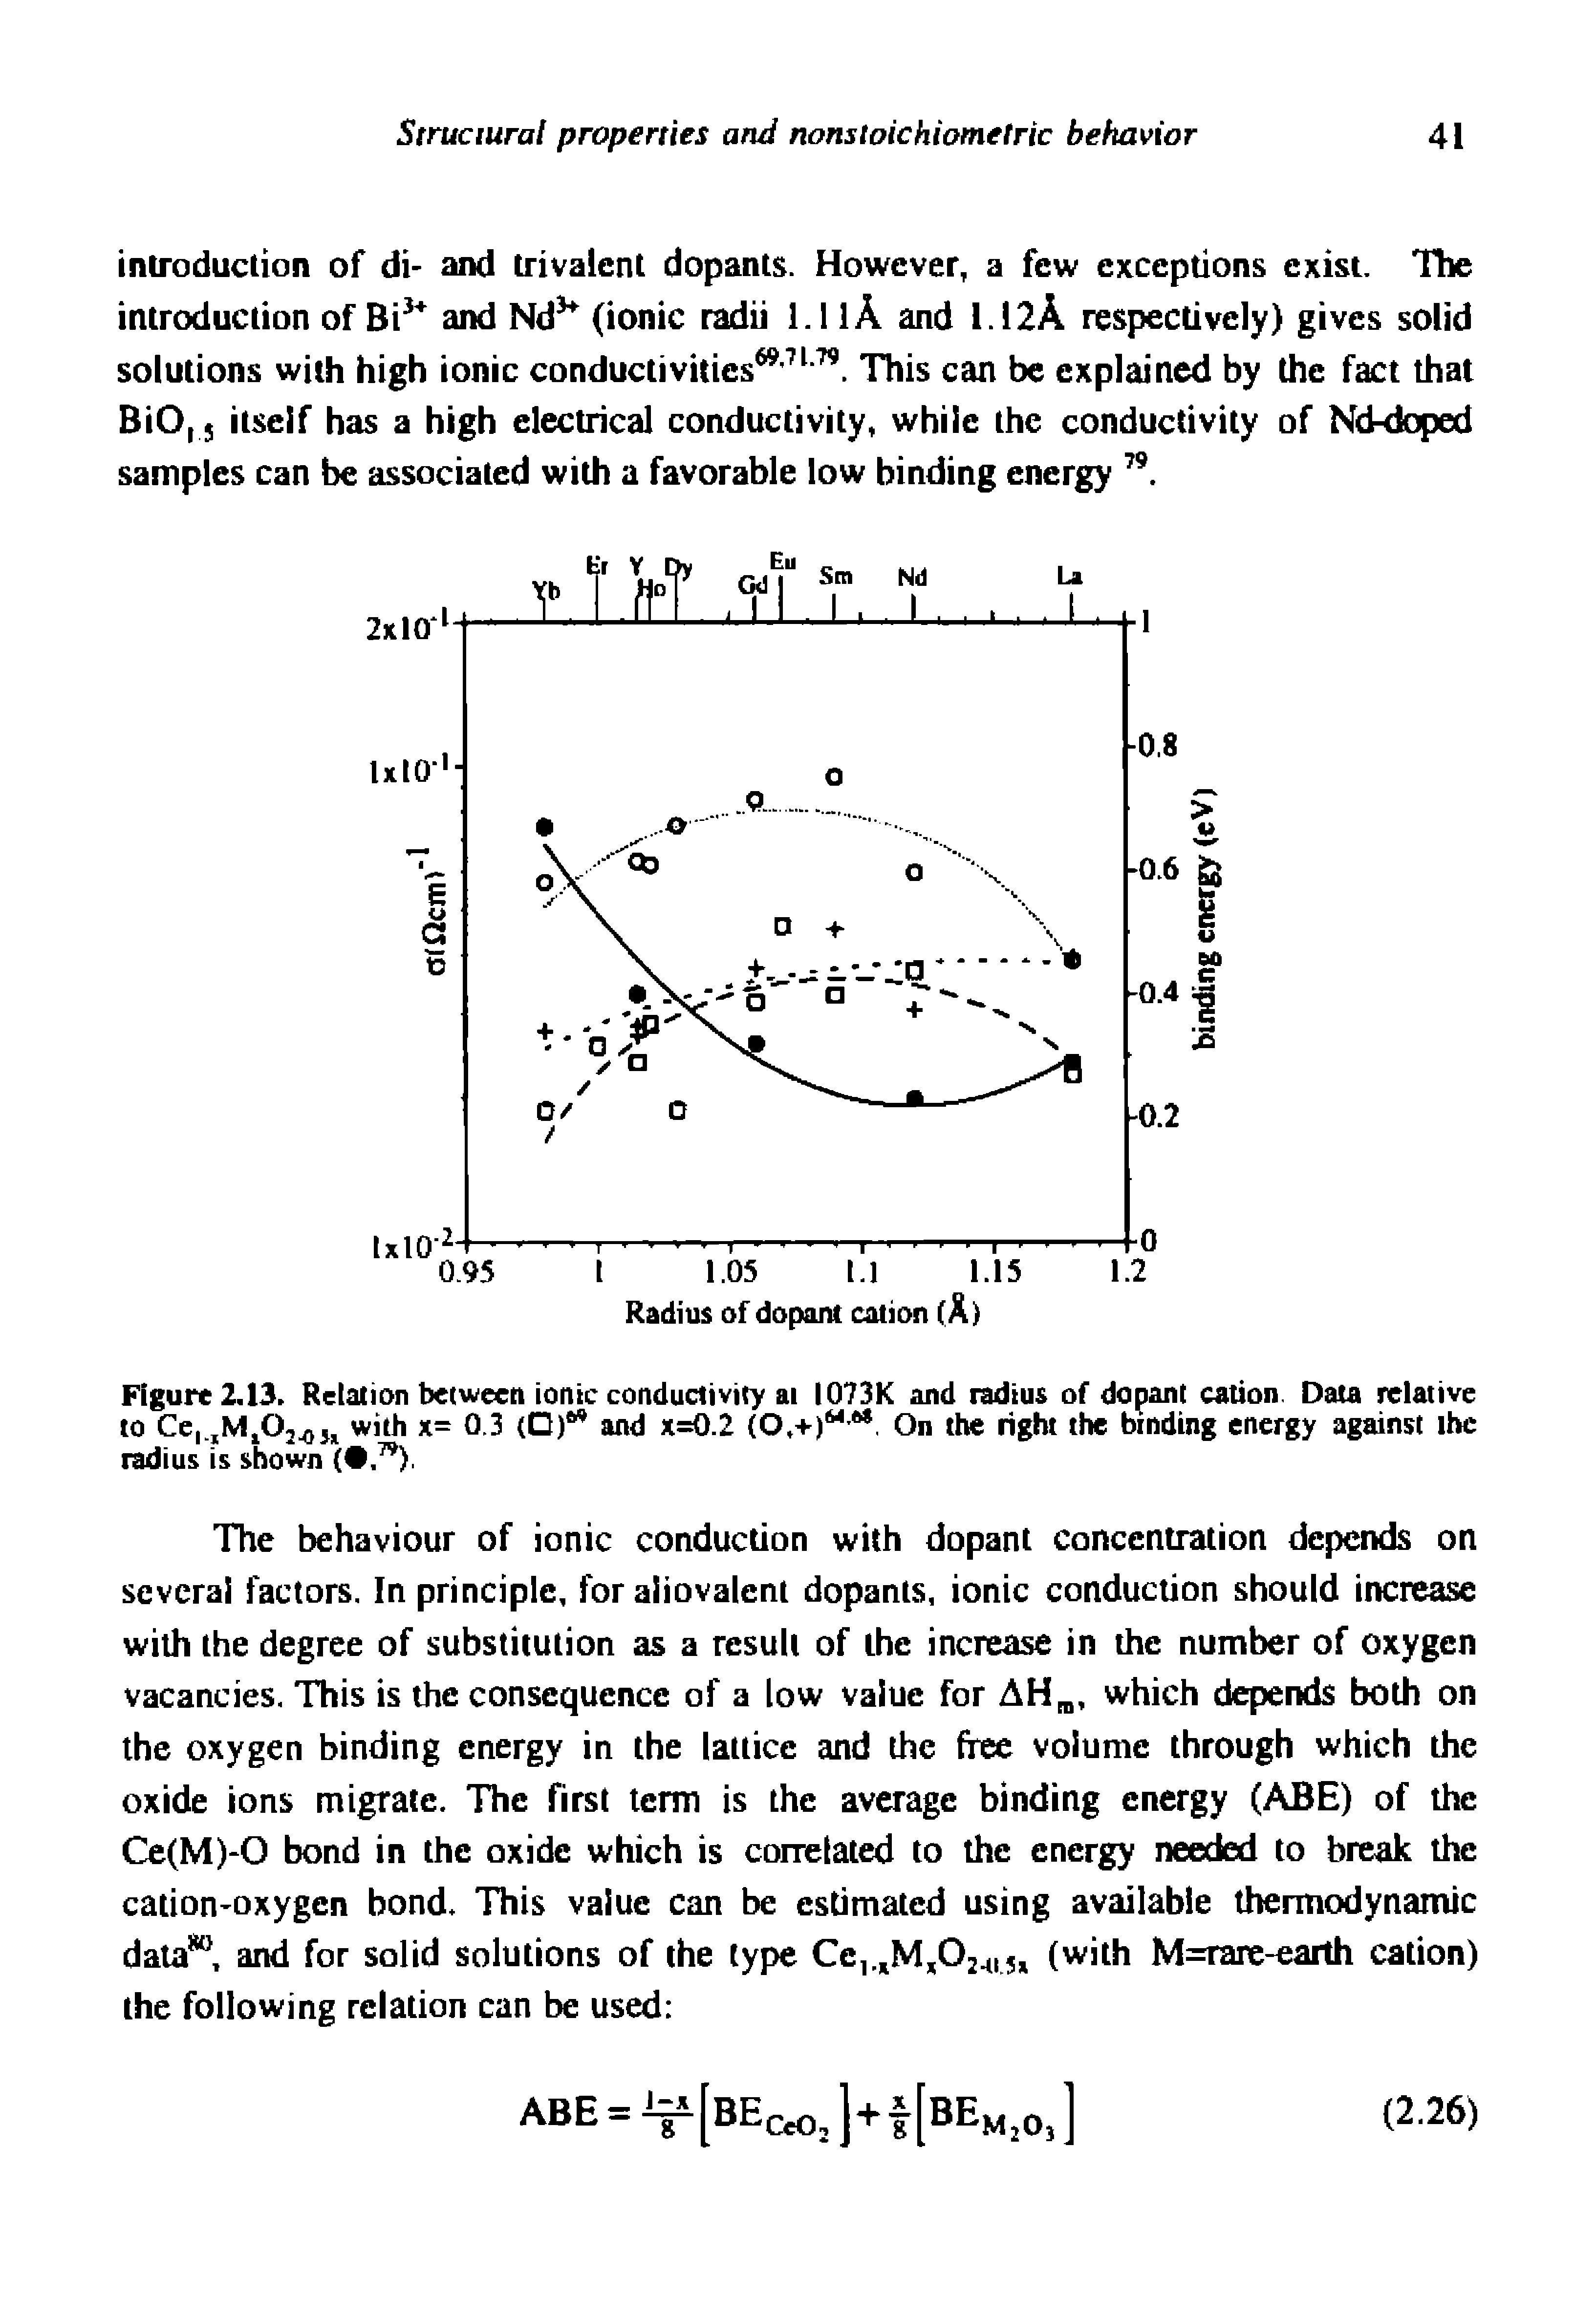 Figure 2.13. Relation between ionic conductivity ai I073K and radius of dopant cation. Data relative to Ce, with x= 0.3 (D) and x=0.2 0.+) , On the right the binding energy against ihc...